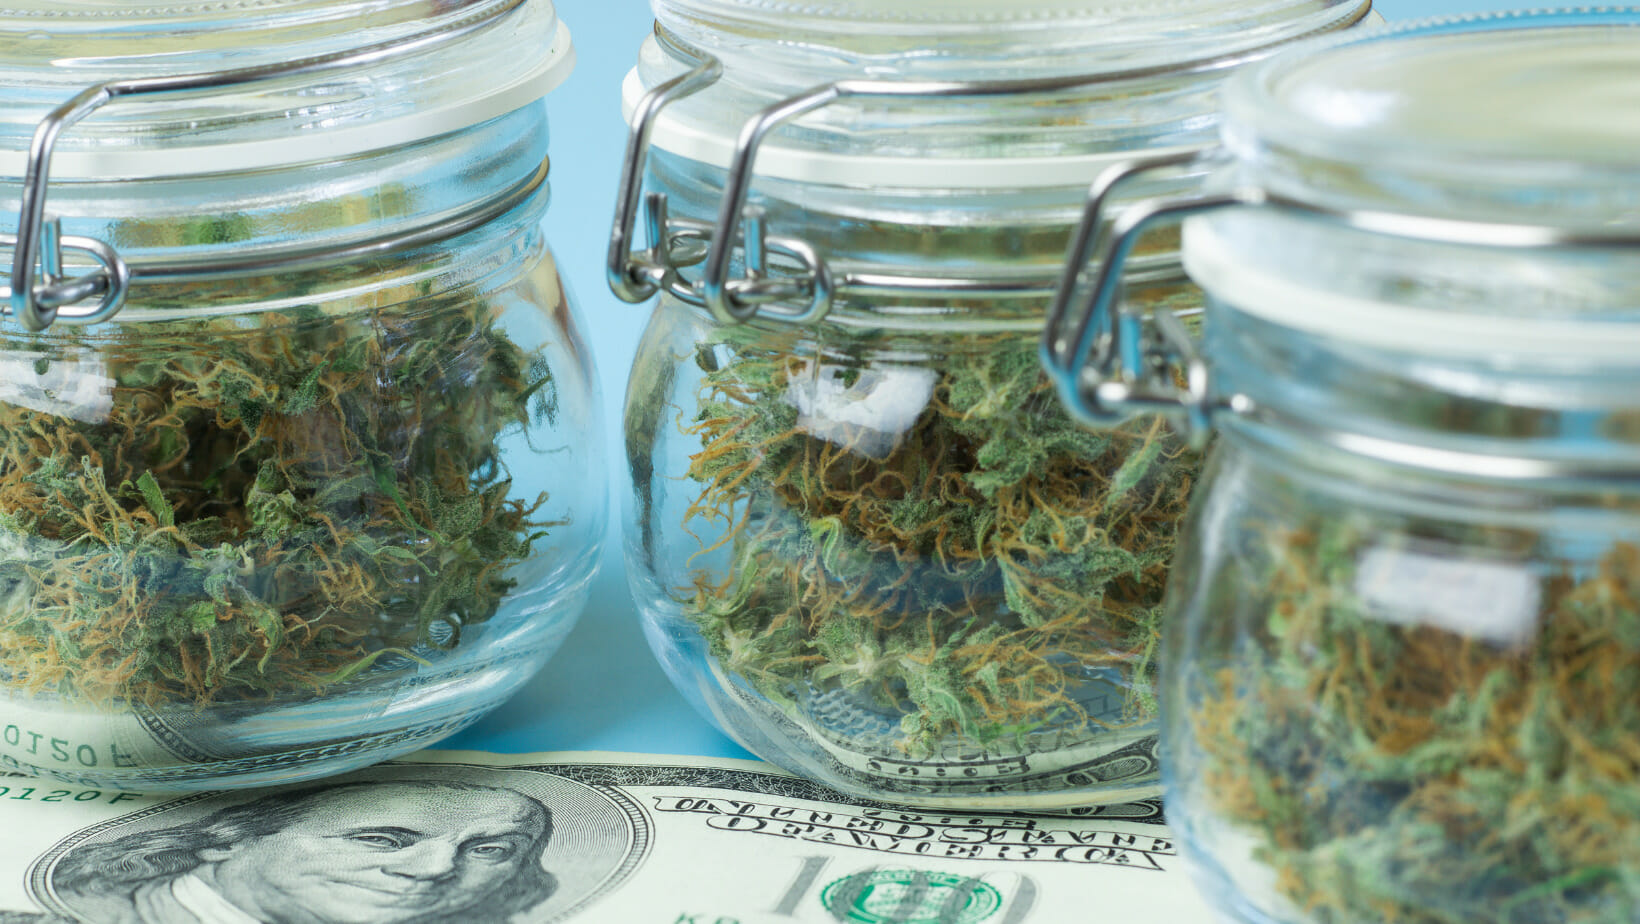 Glass jars of cannabis and a $100 bill